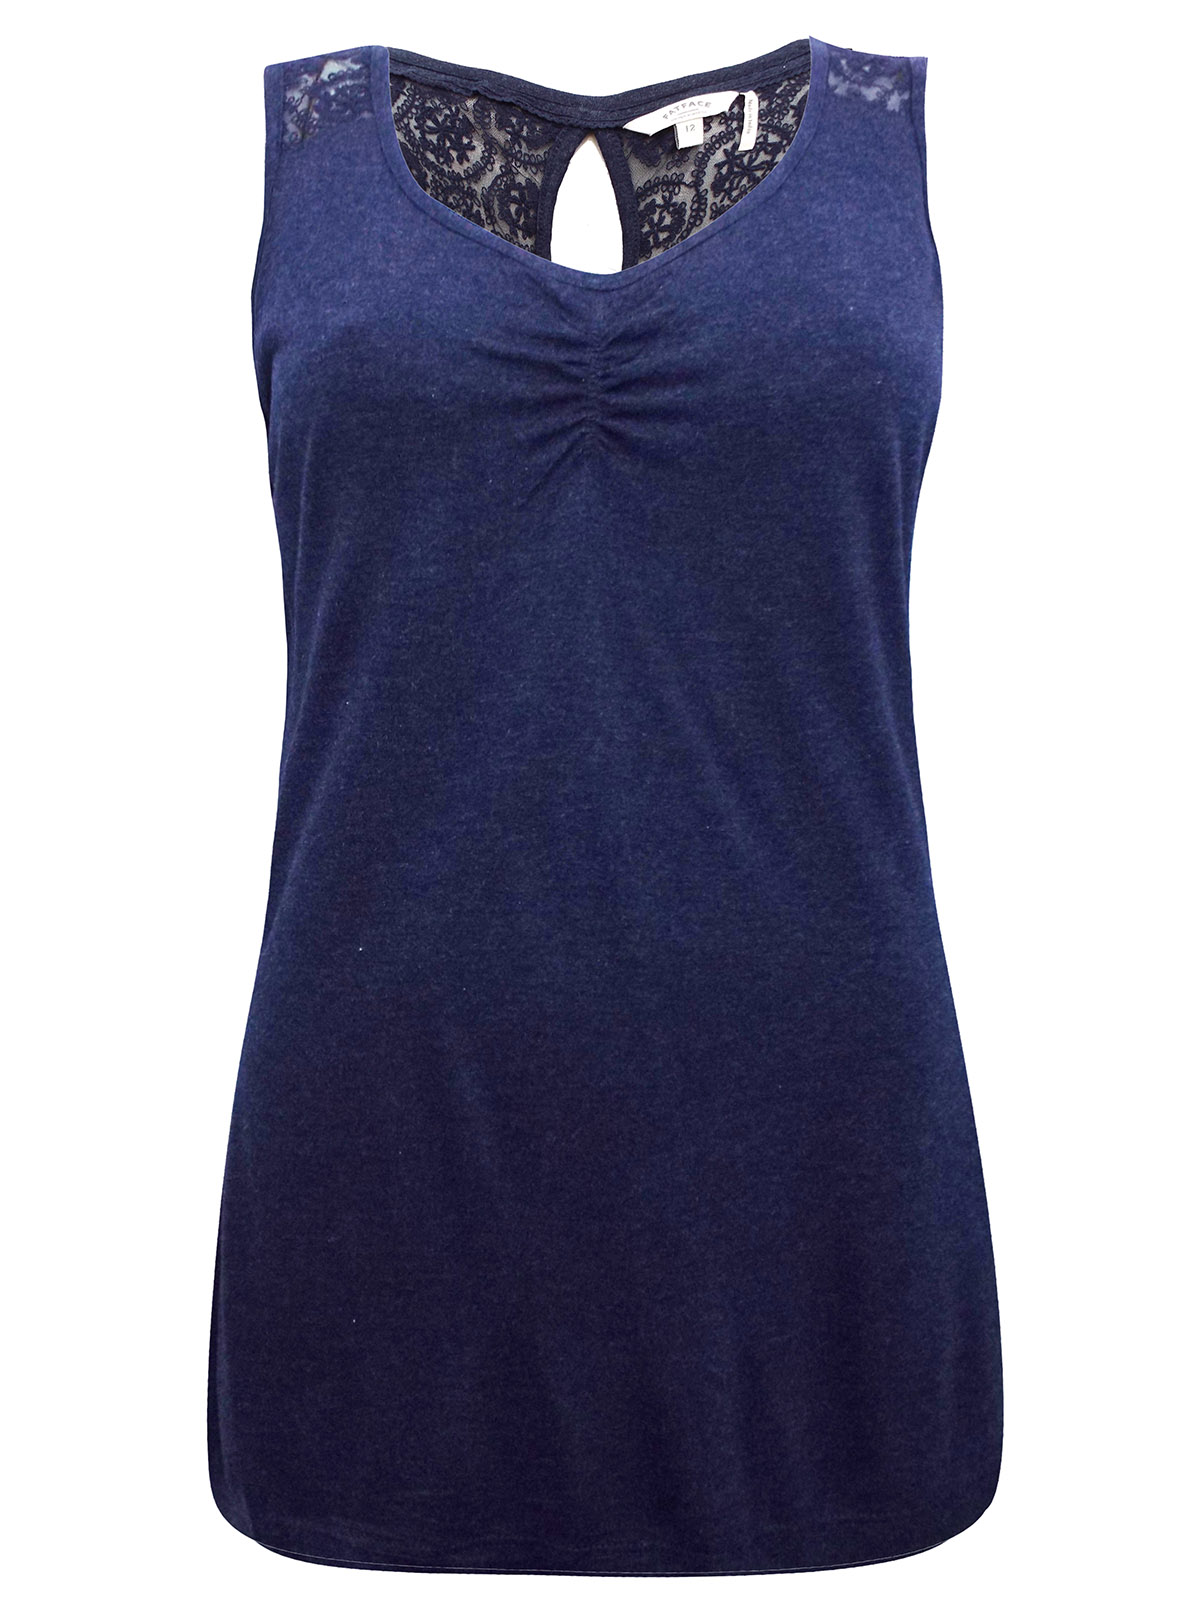 FAT FACE - - Fat Face Twilight NAVY Lucy Jersey Lace Panel Vest Top ...